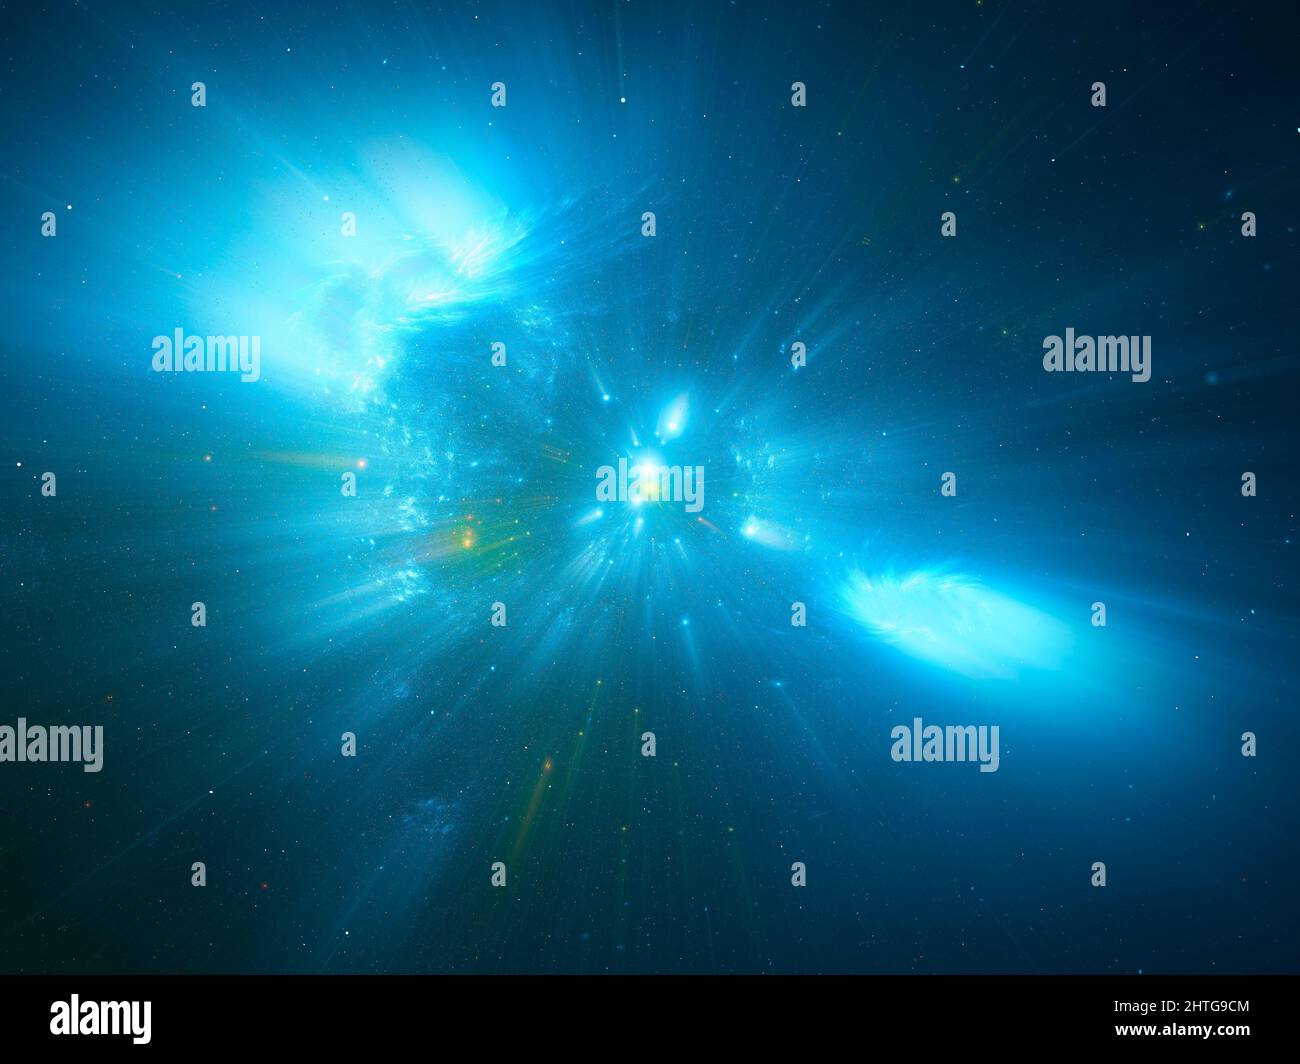 Blurred space theme background with falling stars - 3d illustration Stock Photo